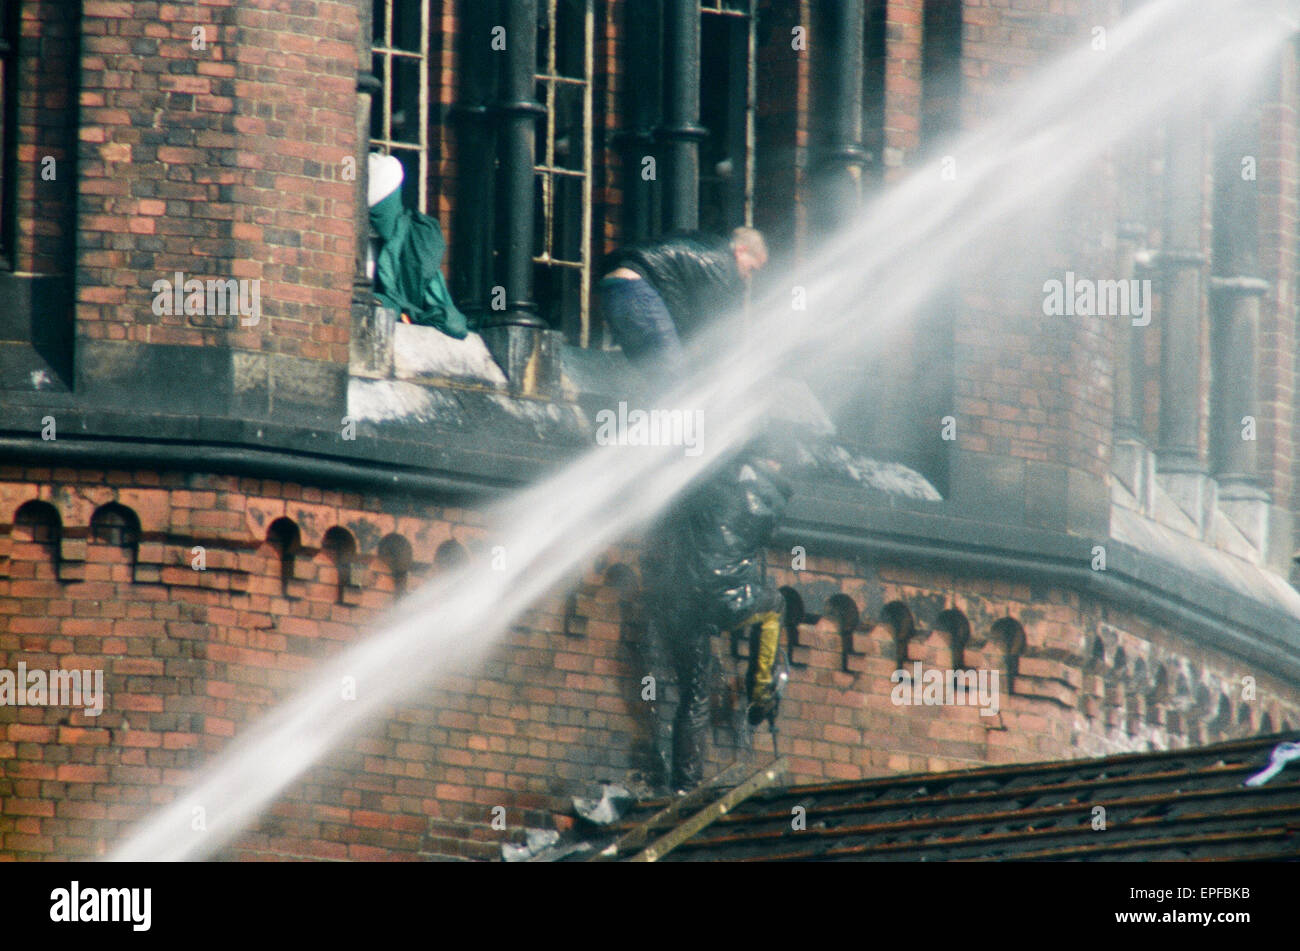 A 25-day prison riot and rooftop protest at Strangeways Prison in Manchester, England. The riot began on the 1st April 1990 when prisoners took control of the prison chapel, and the riot quickly spread throughout most of the prison. The riot and rooftop p Stock Photo